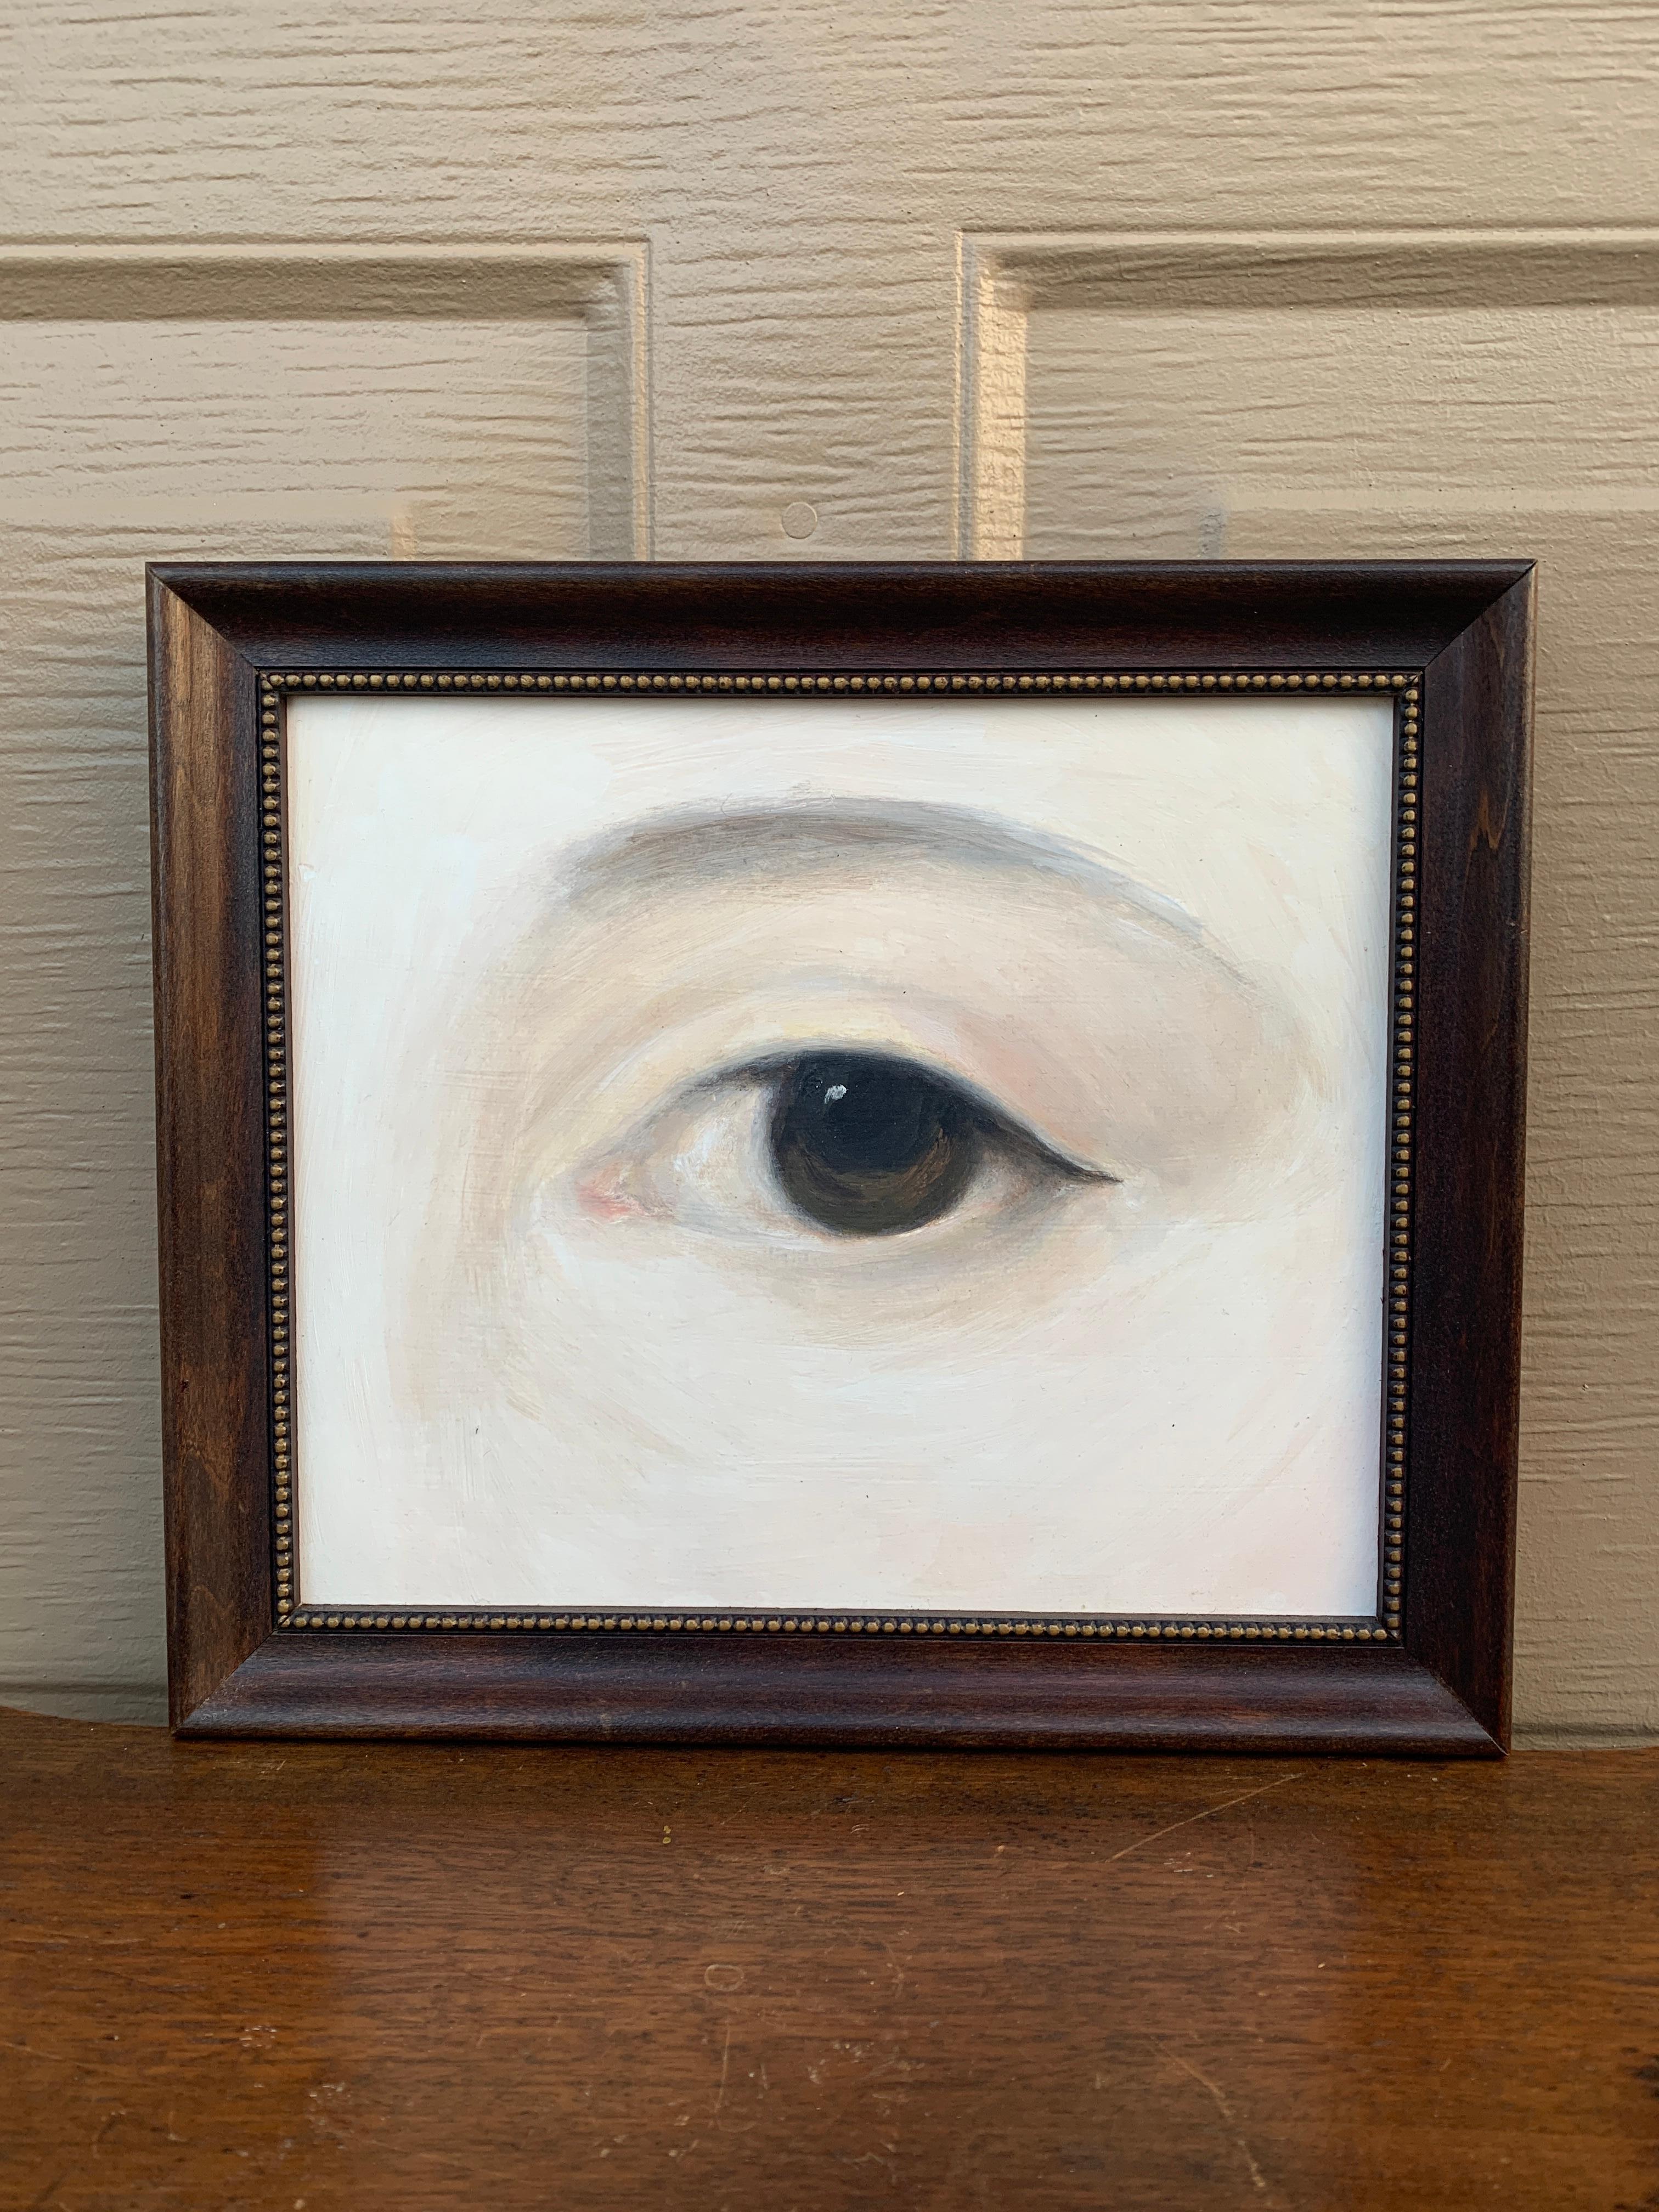 A beautiful Georgian or Regency style hand-painted framed oil on canvas lover's eye painting

USA, Early 21st Century

Measures: 11